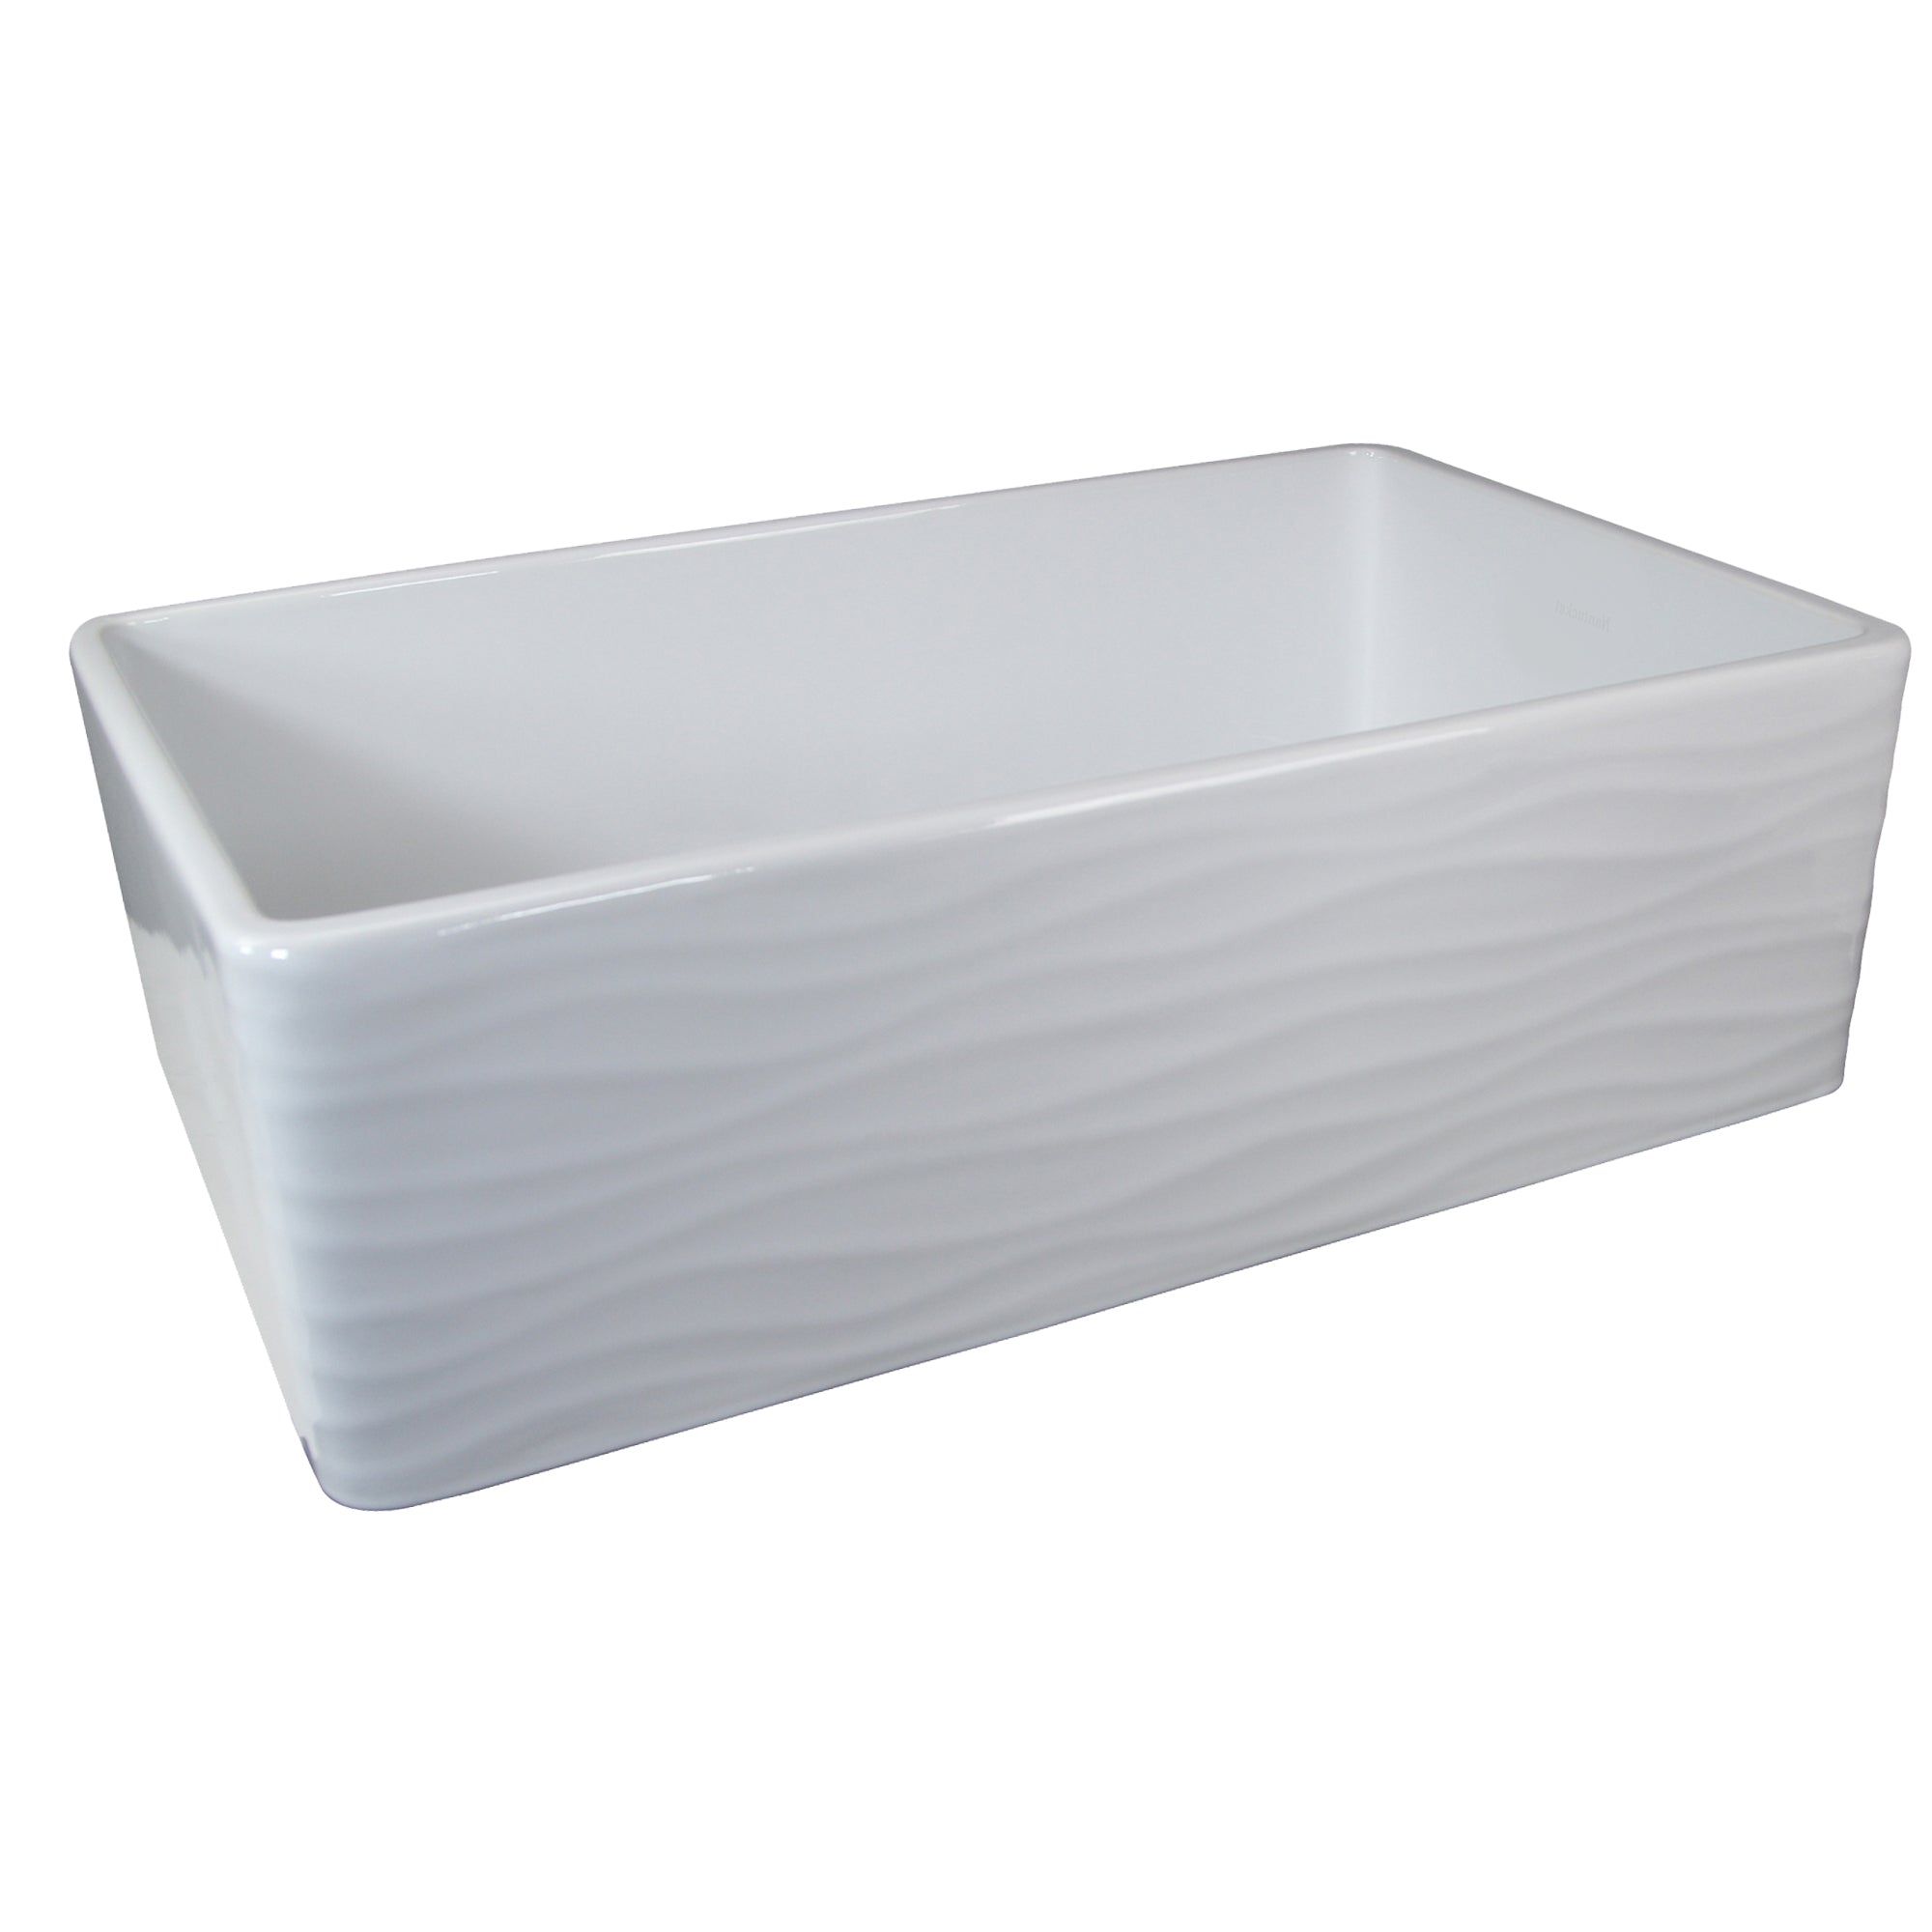 Nantucket Sinks 33" Farmhouse Fireclay Sink with Waves Apron